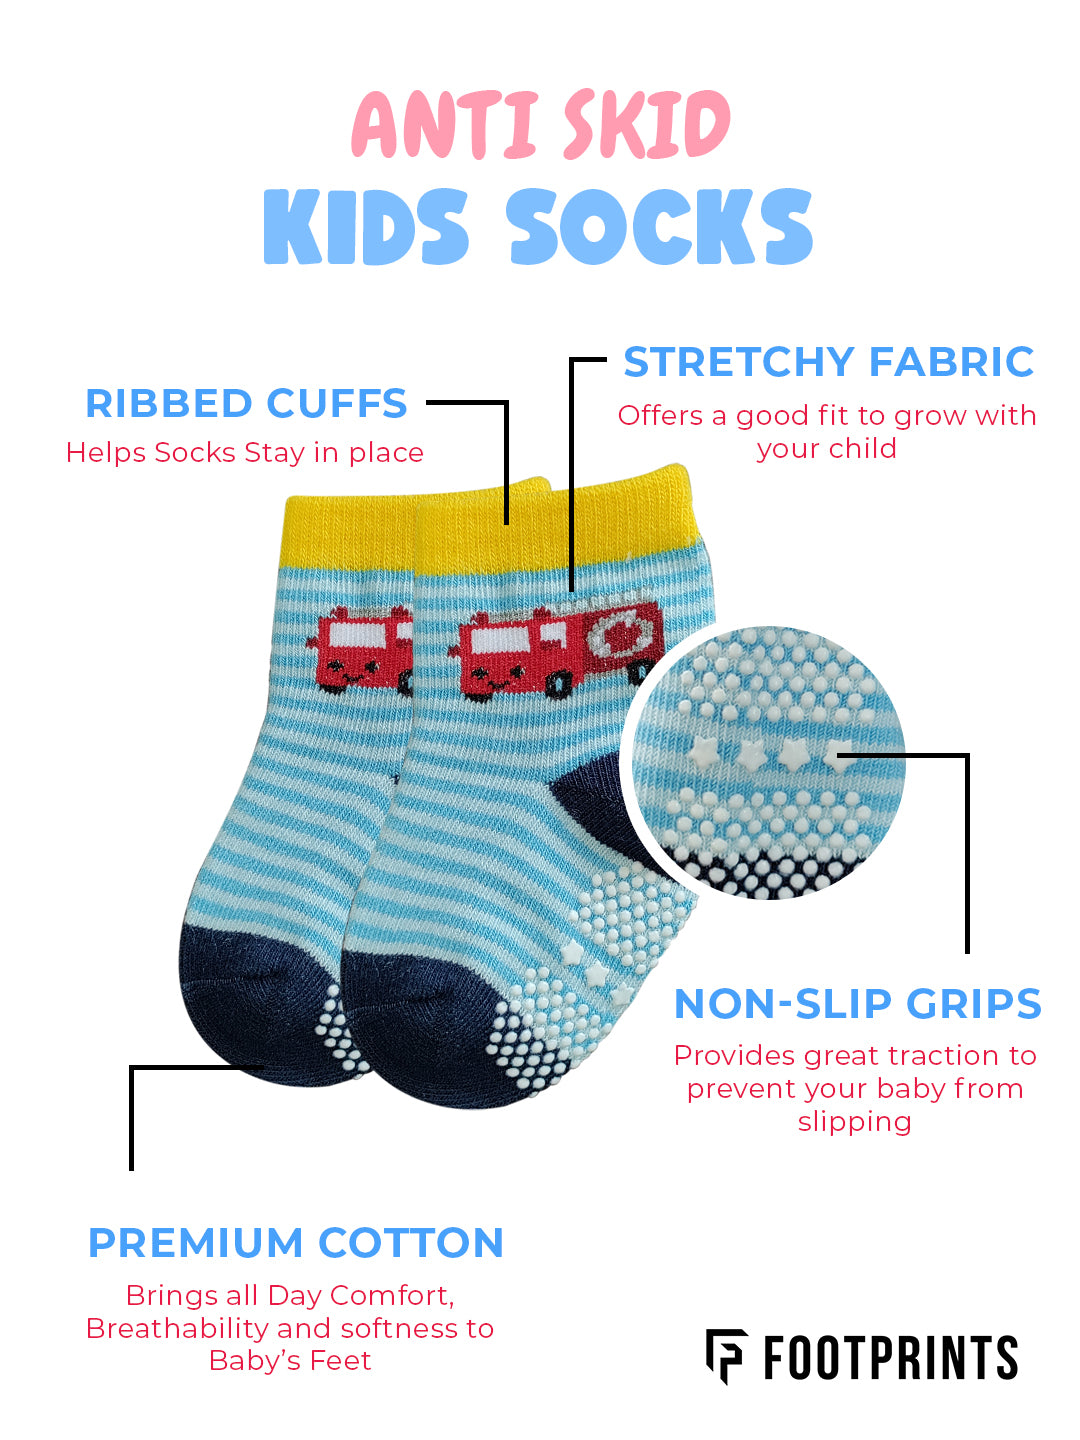 FOOTPRINTS Baby's Organic Cotton Anti-Skid Socks (Multicolour, Mix Designs) - Pack of Any 5 Pairs